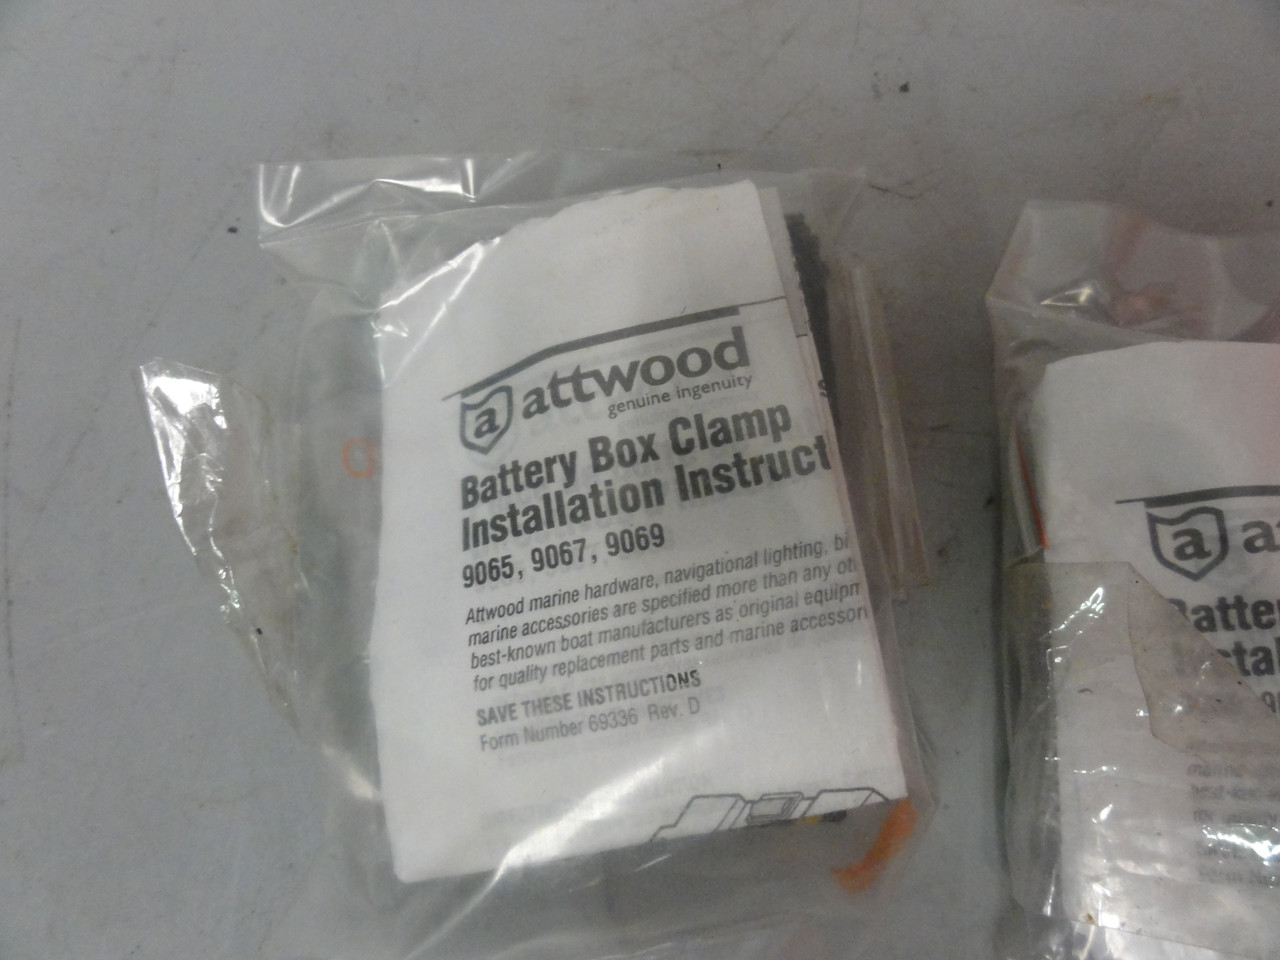 Attwood Battery Box Clamp 9065, 9067, 9069 (Lot of 2) Brand New